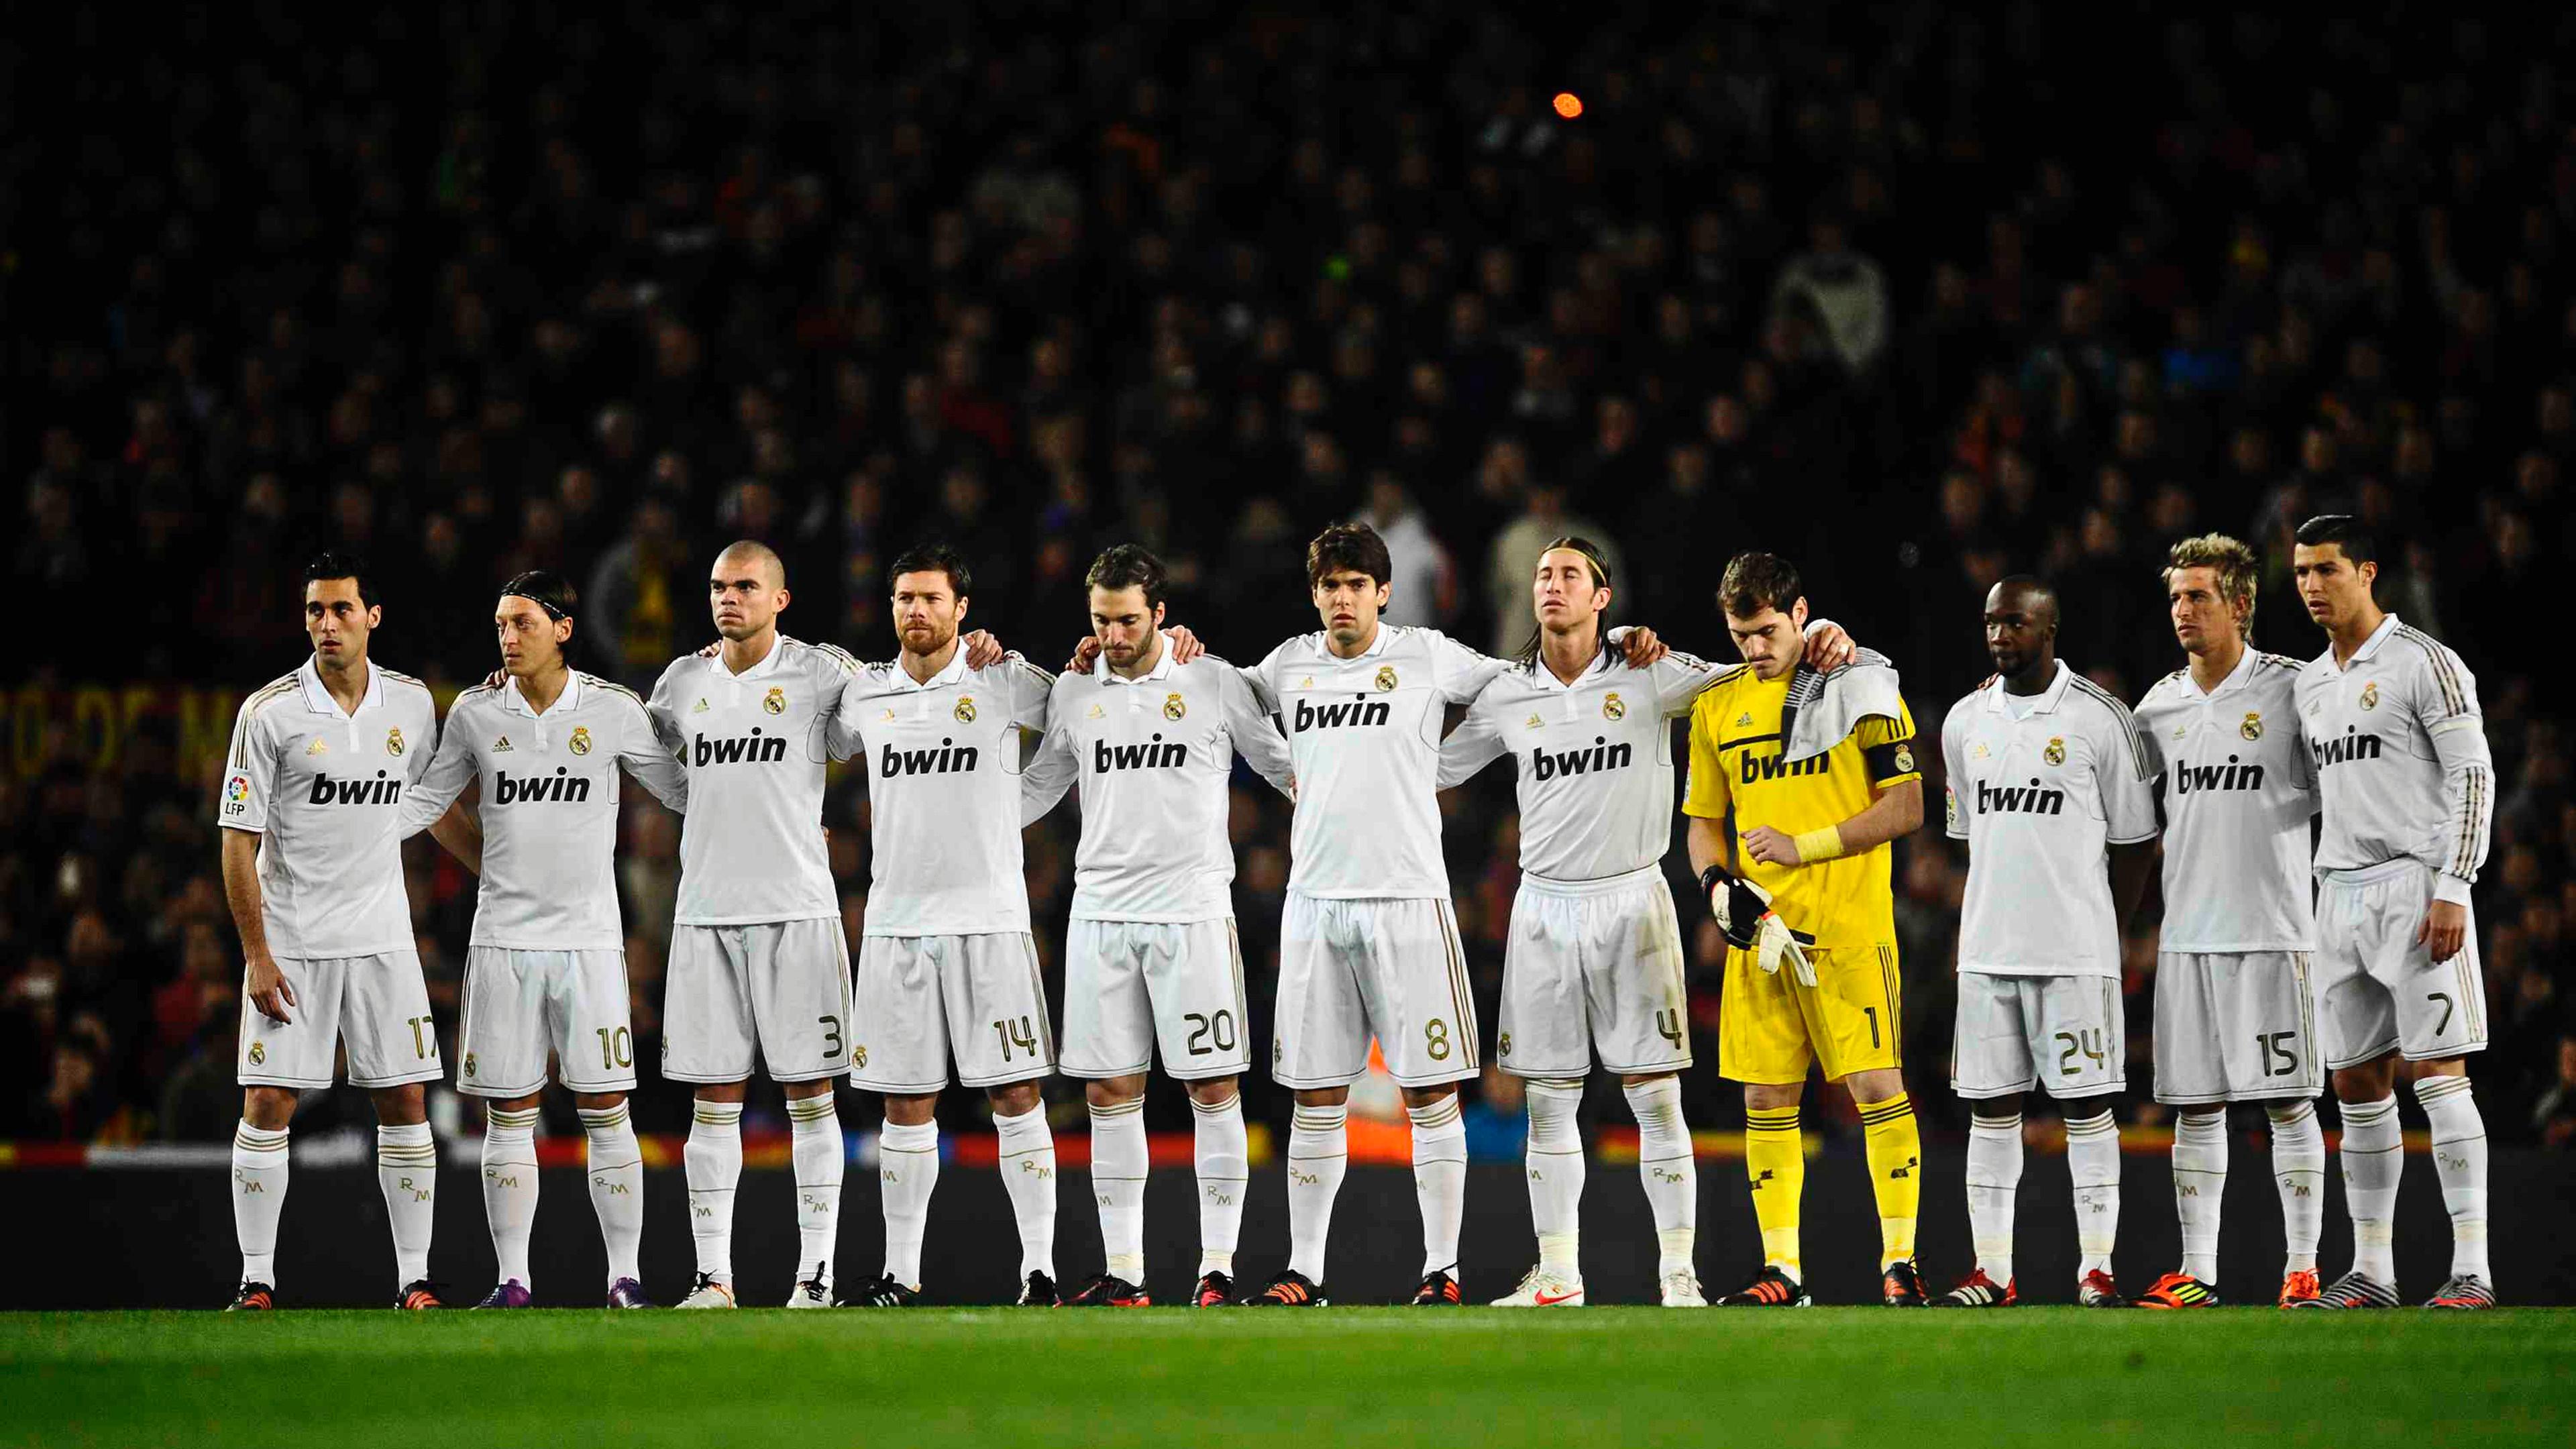 Real Madrid Wallpaper Android - Real Madrid Team Background - HD Wallpaper 